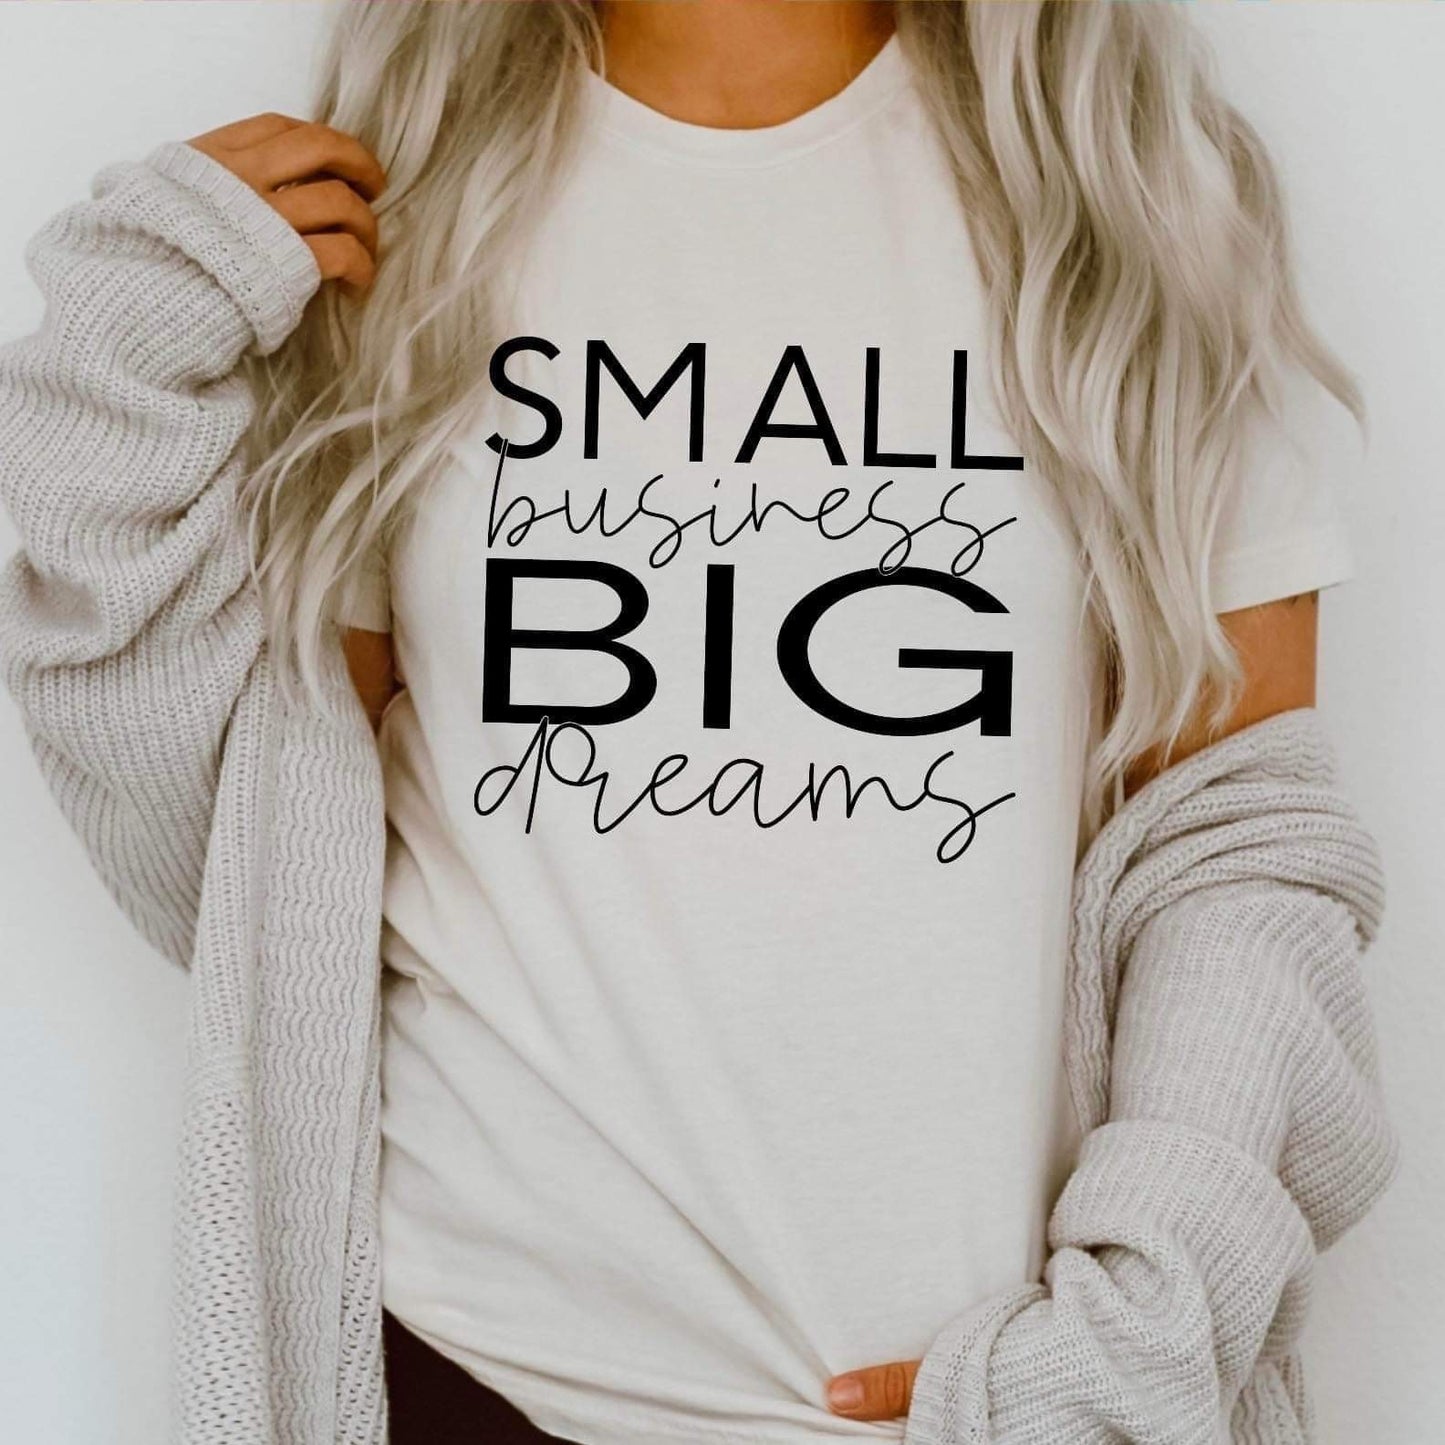 Small Business big dreams- *Ollie & Co. Exclusive*